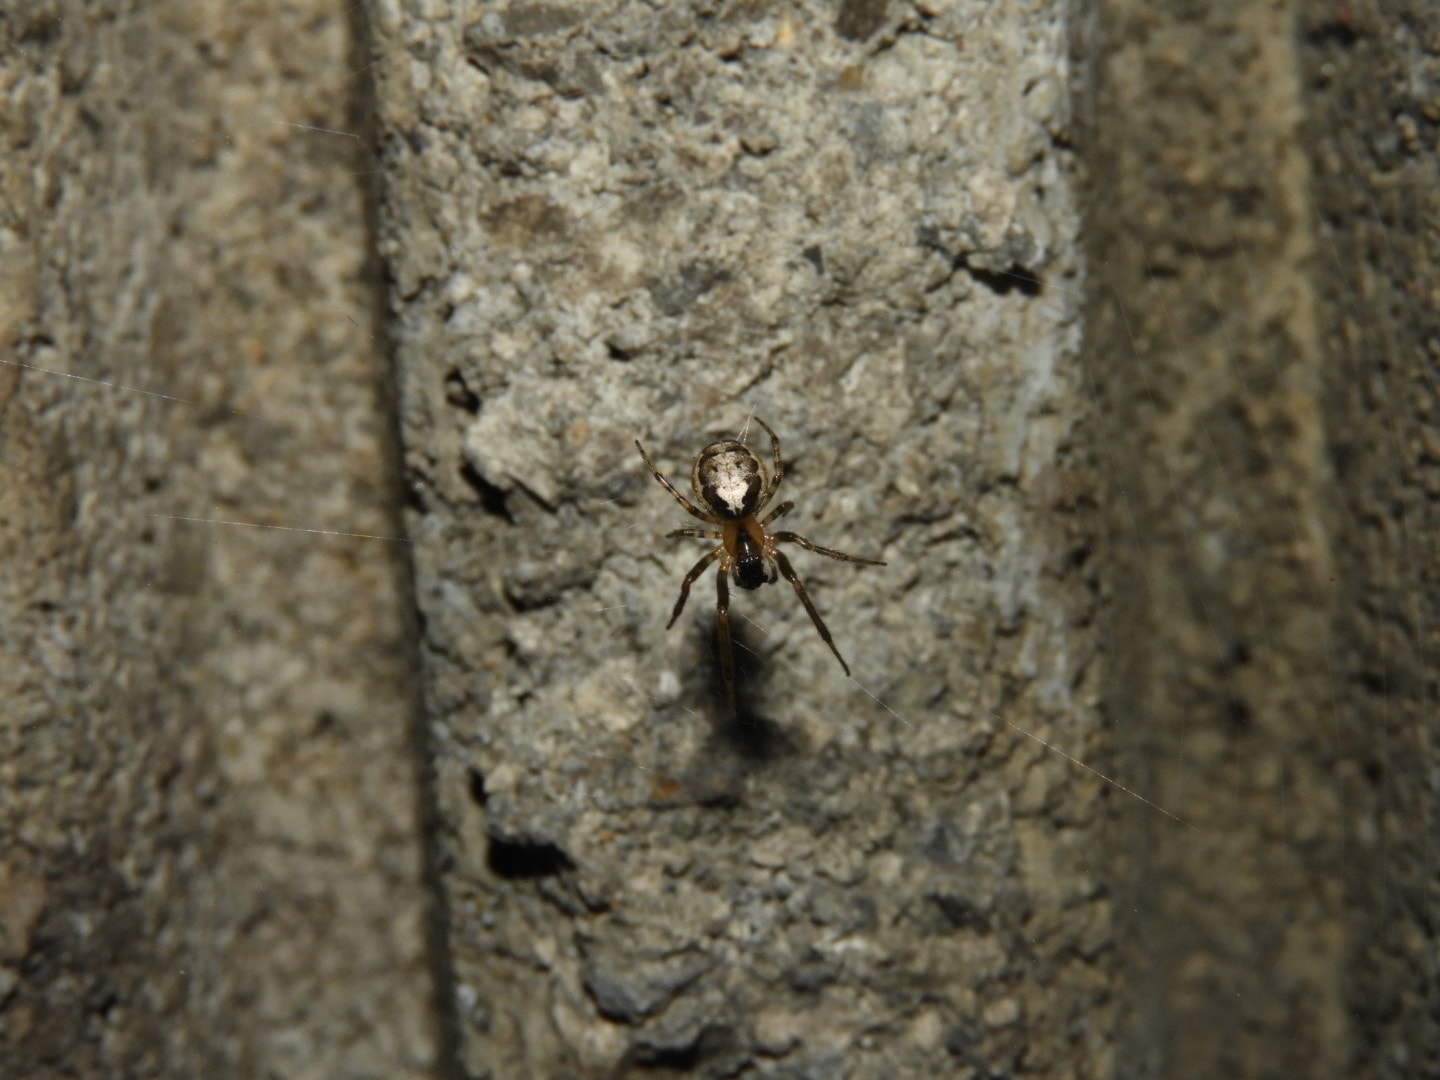 Picture of Zygiella x-notata (Missing Sector Orb-weaver) - Dorsal